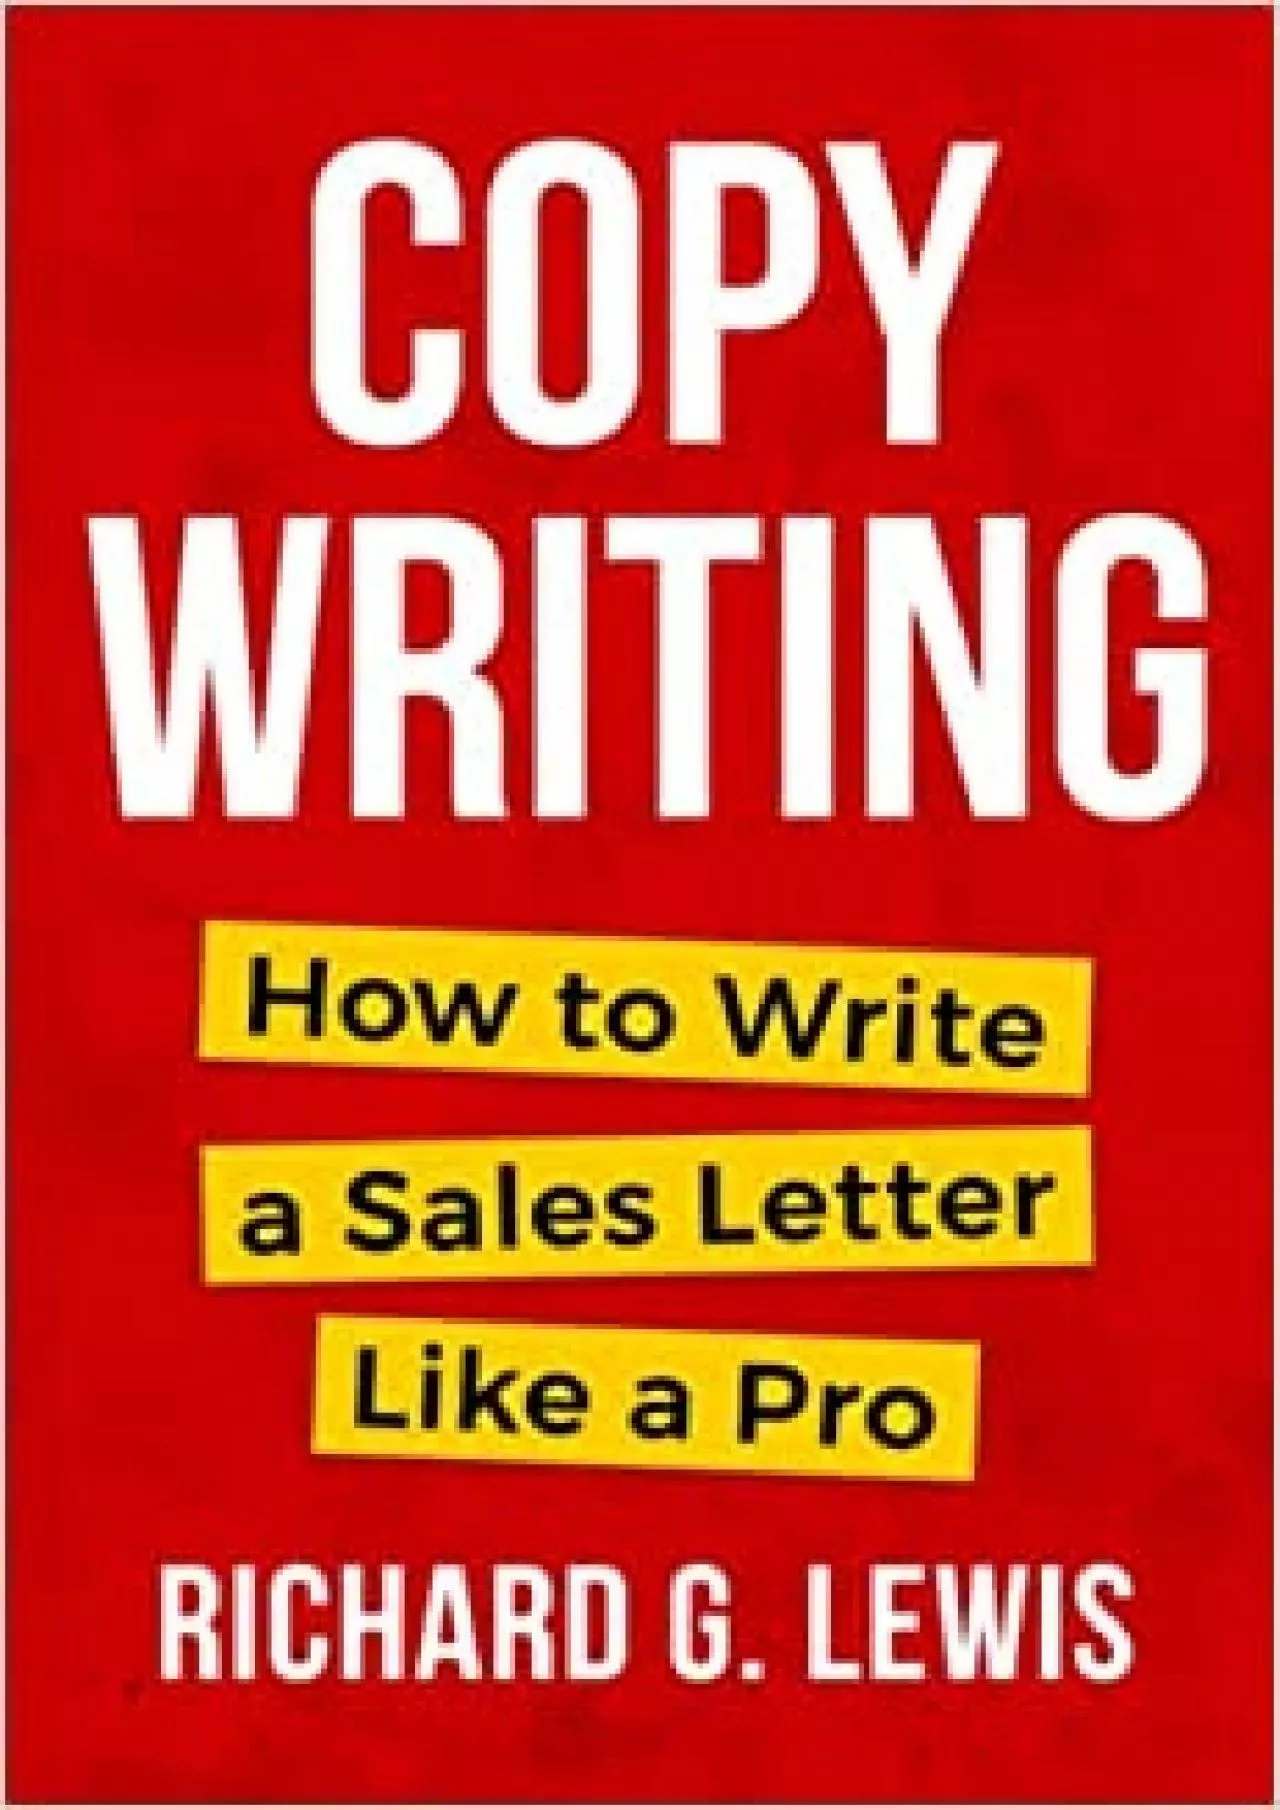 COPYWRITING How to Write a Sales Letter Like a Pro Competitive Advantage